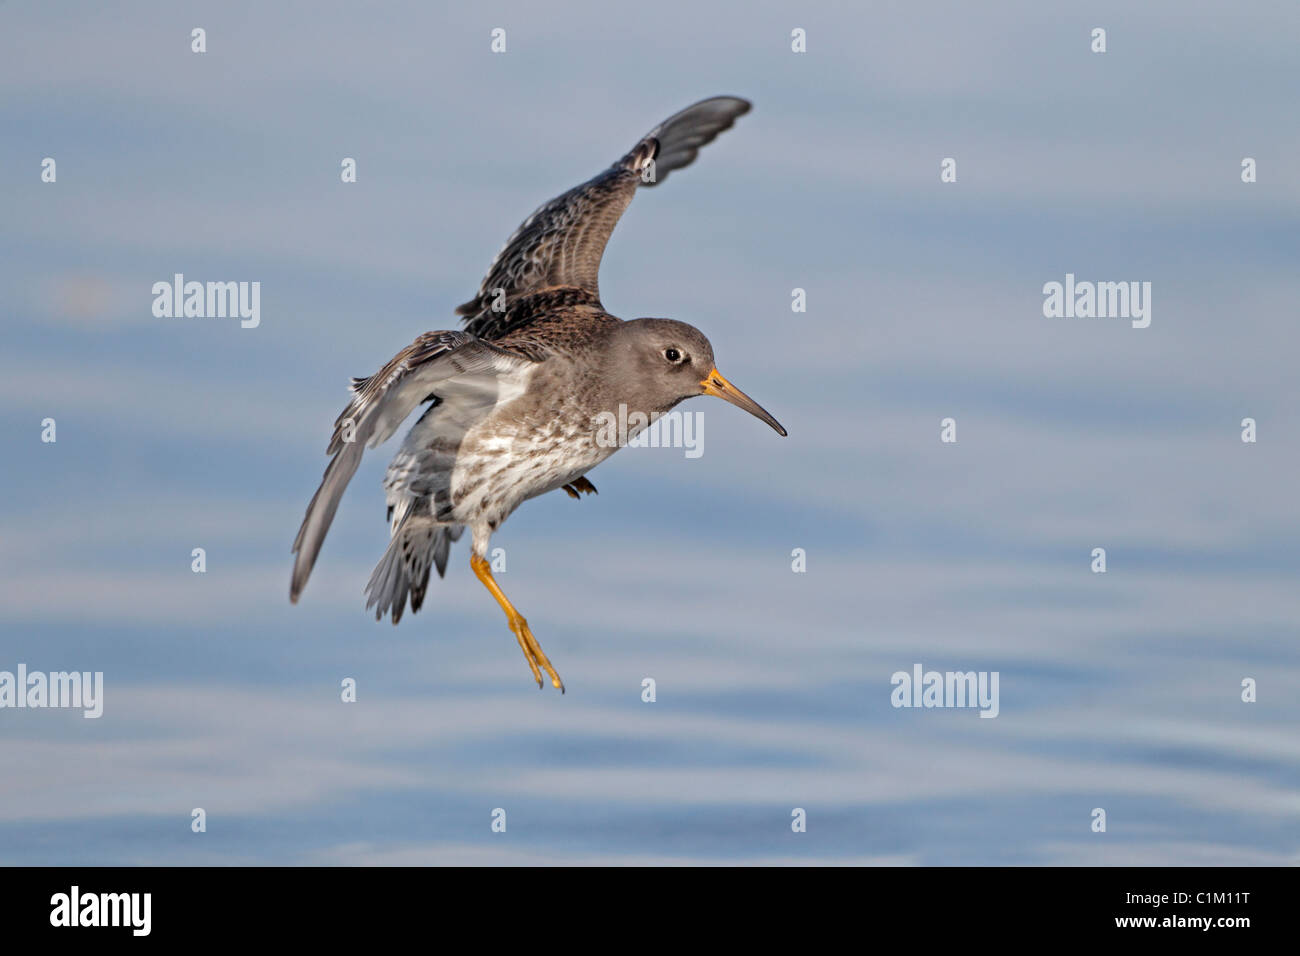 Purple sandpiper coming into land in Iceland in winter plumage Stock Photo